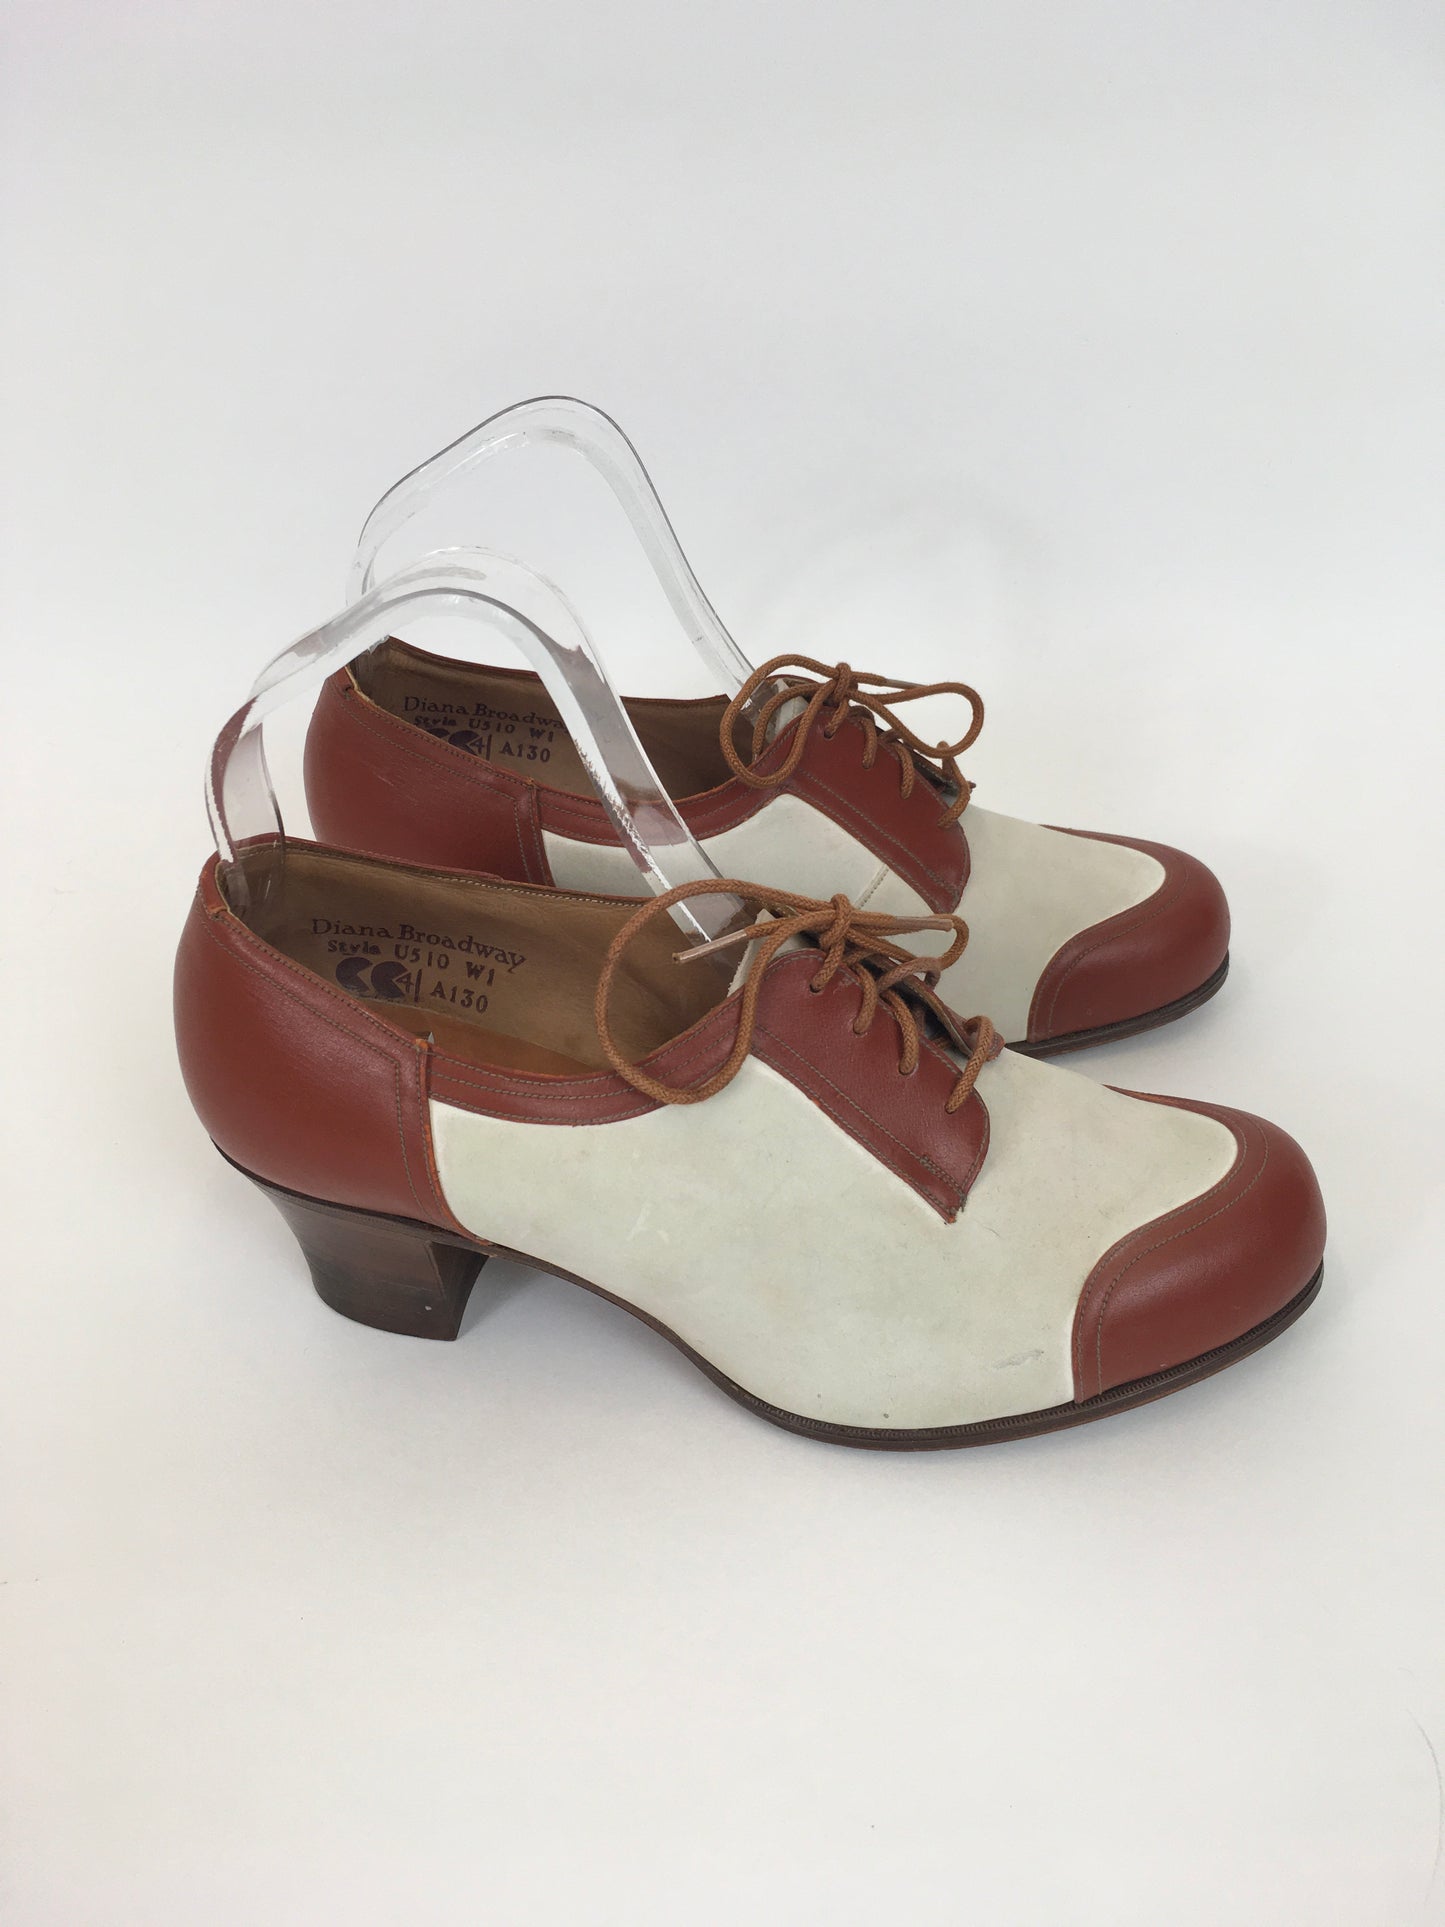 Original 1940’s CC41 ‘ Diana’ Suede & Leather Heels - A Stunning Example From The Era